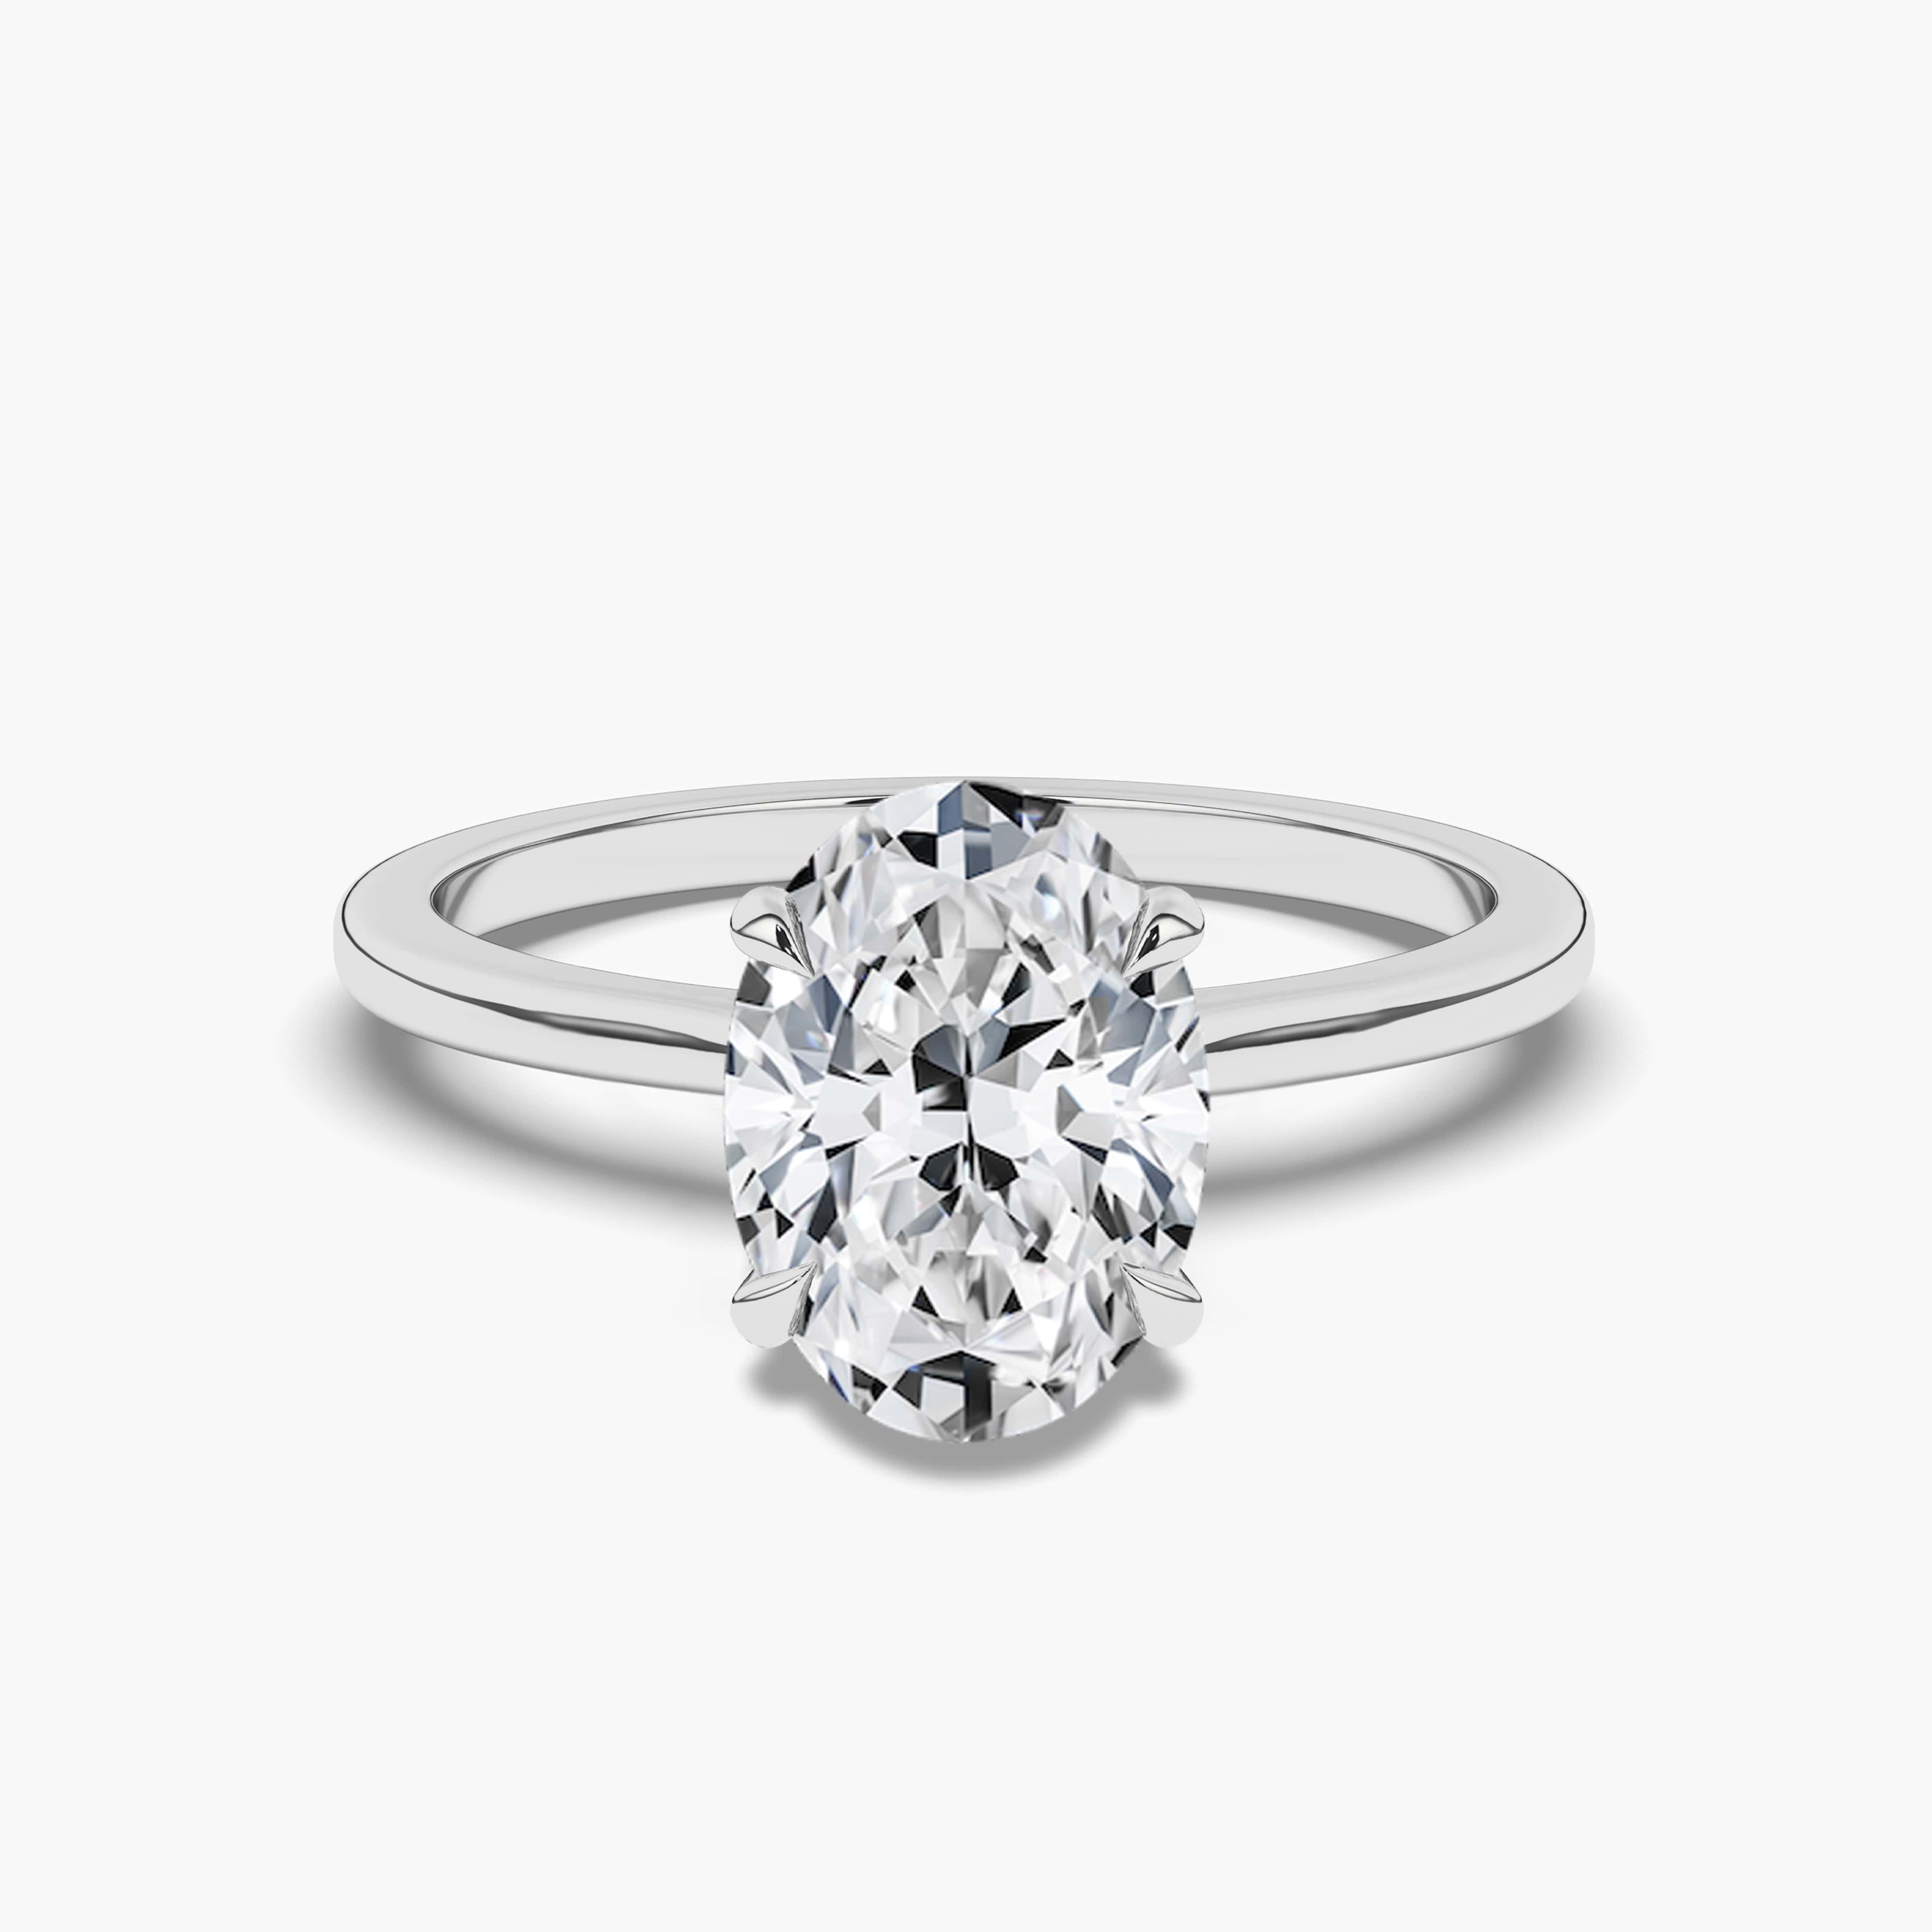 OVAL CUT DIAMOND ENGAGEMENT RING IN WHITE GOLD